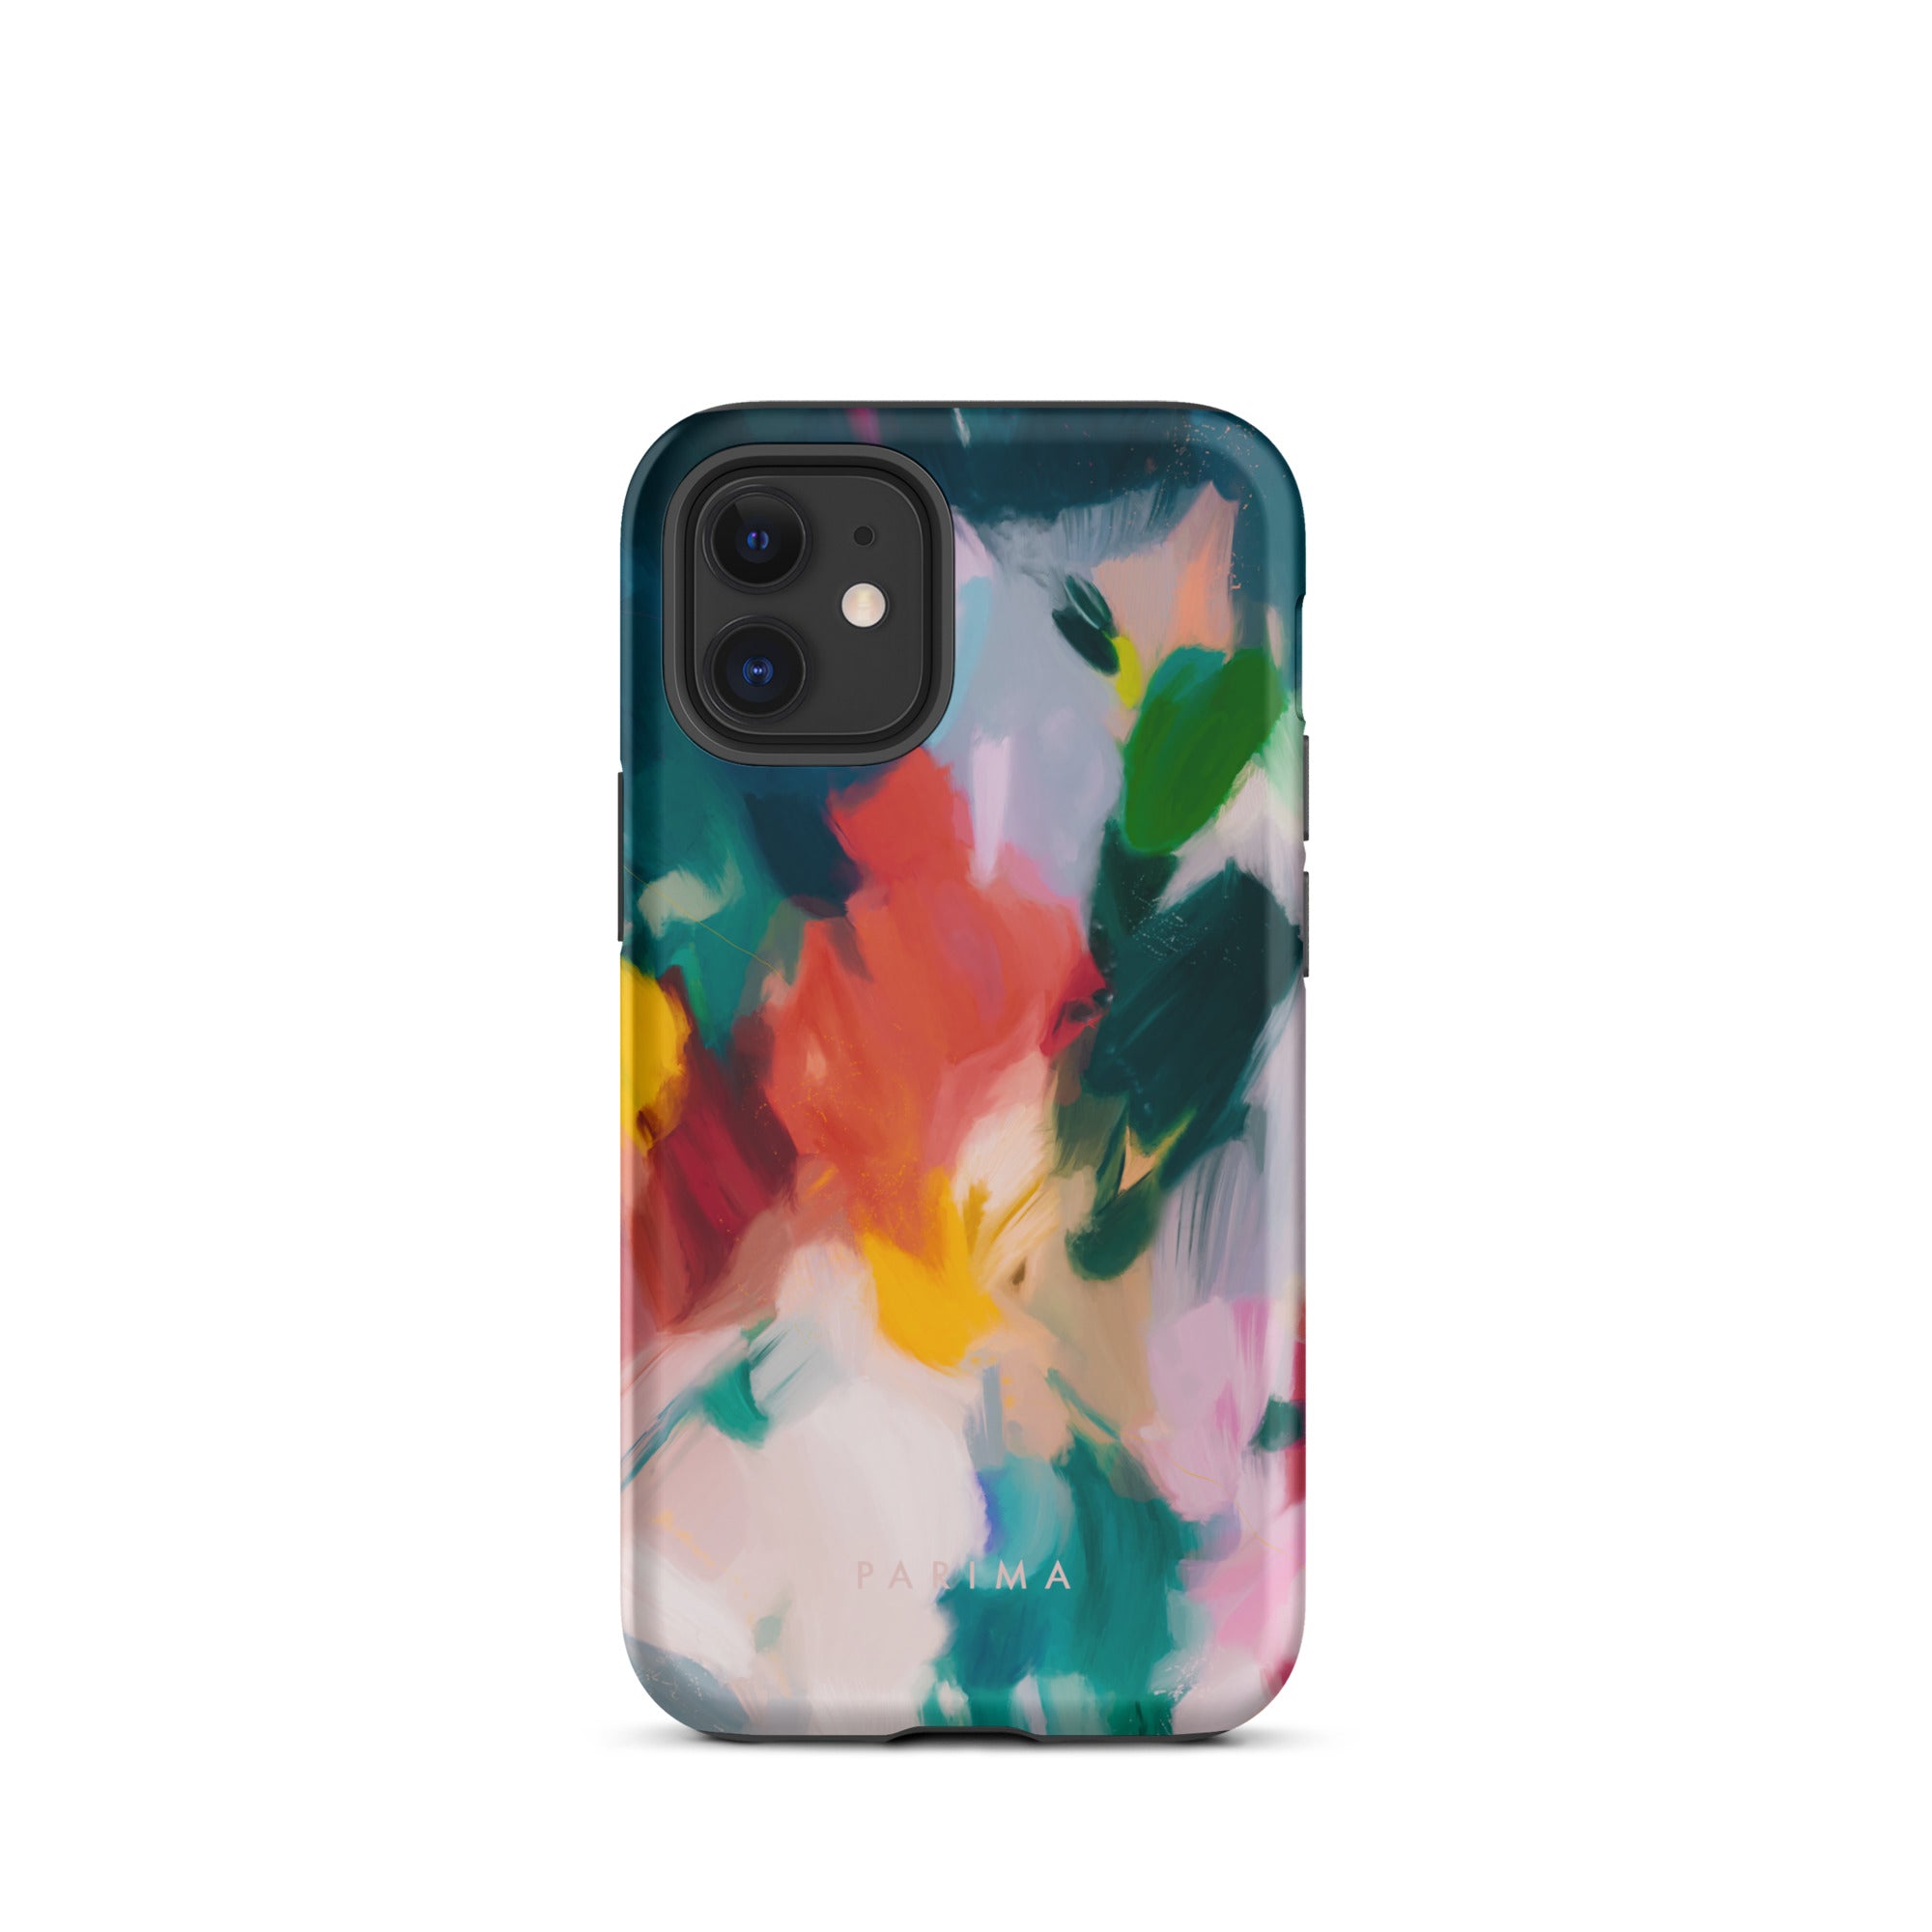 Pomme, blue and red abstract art on iPhone 12 mini tough case by Parima Studio